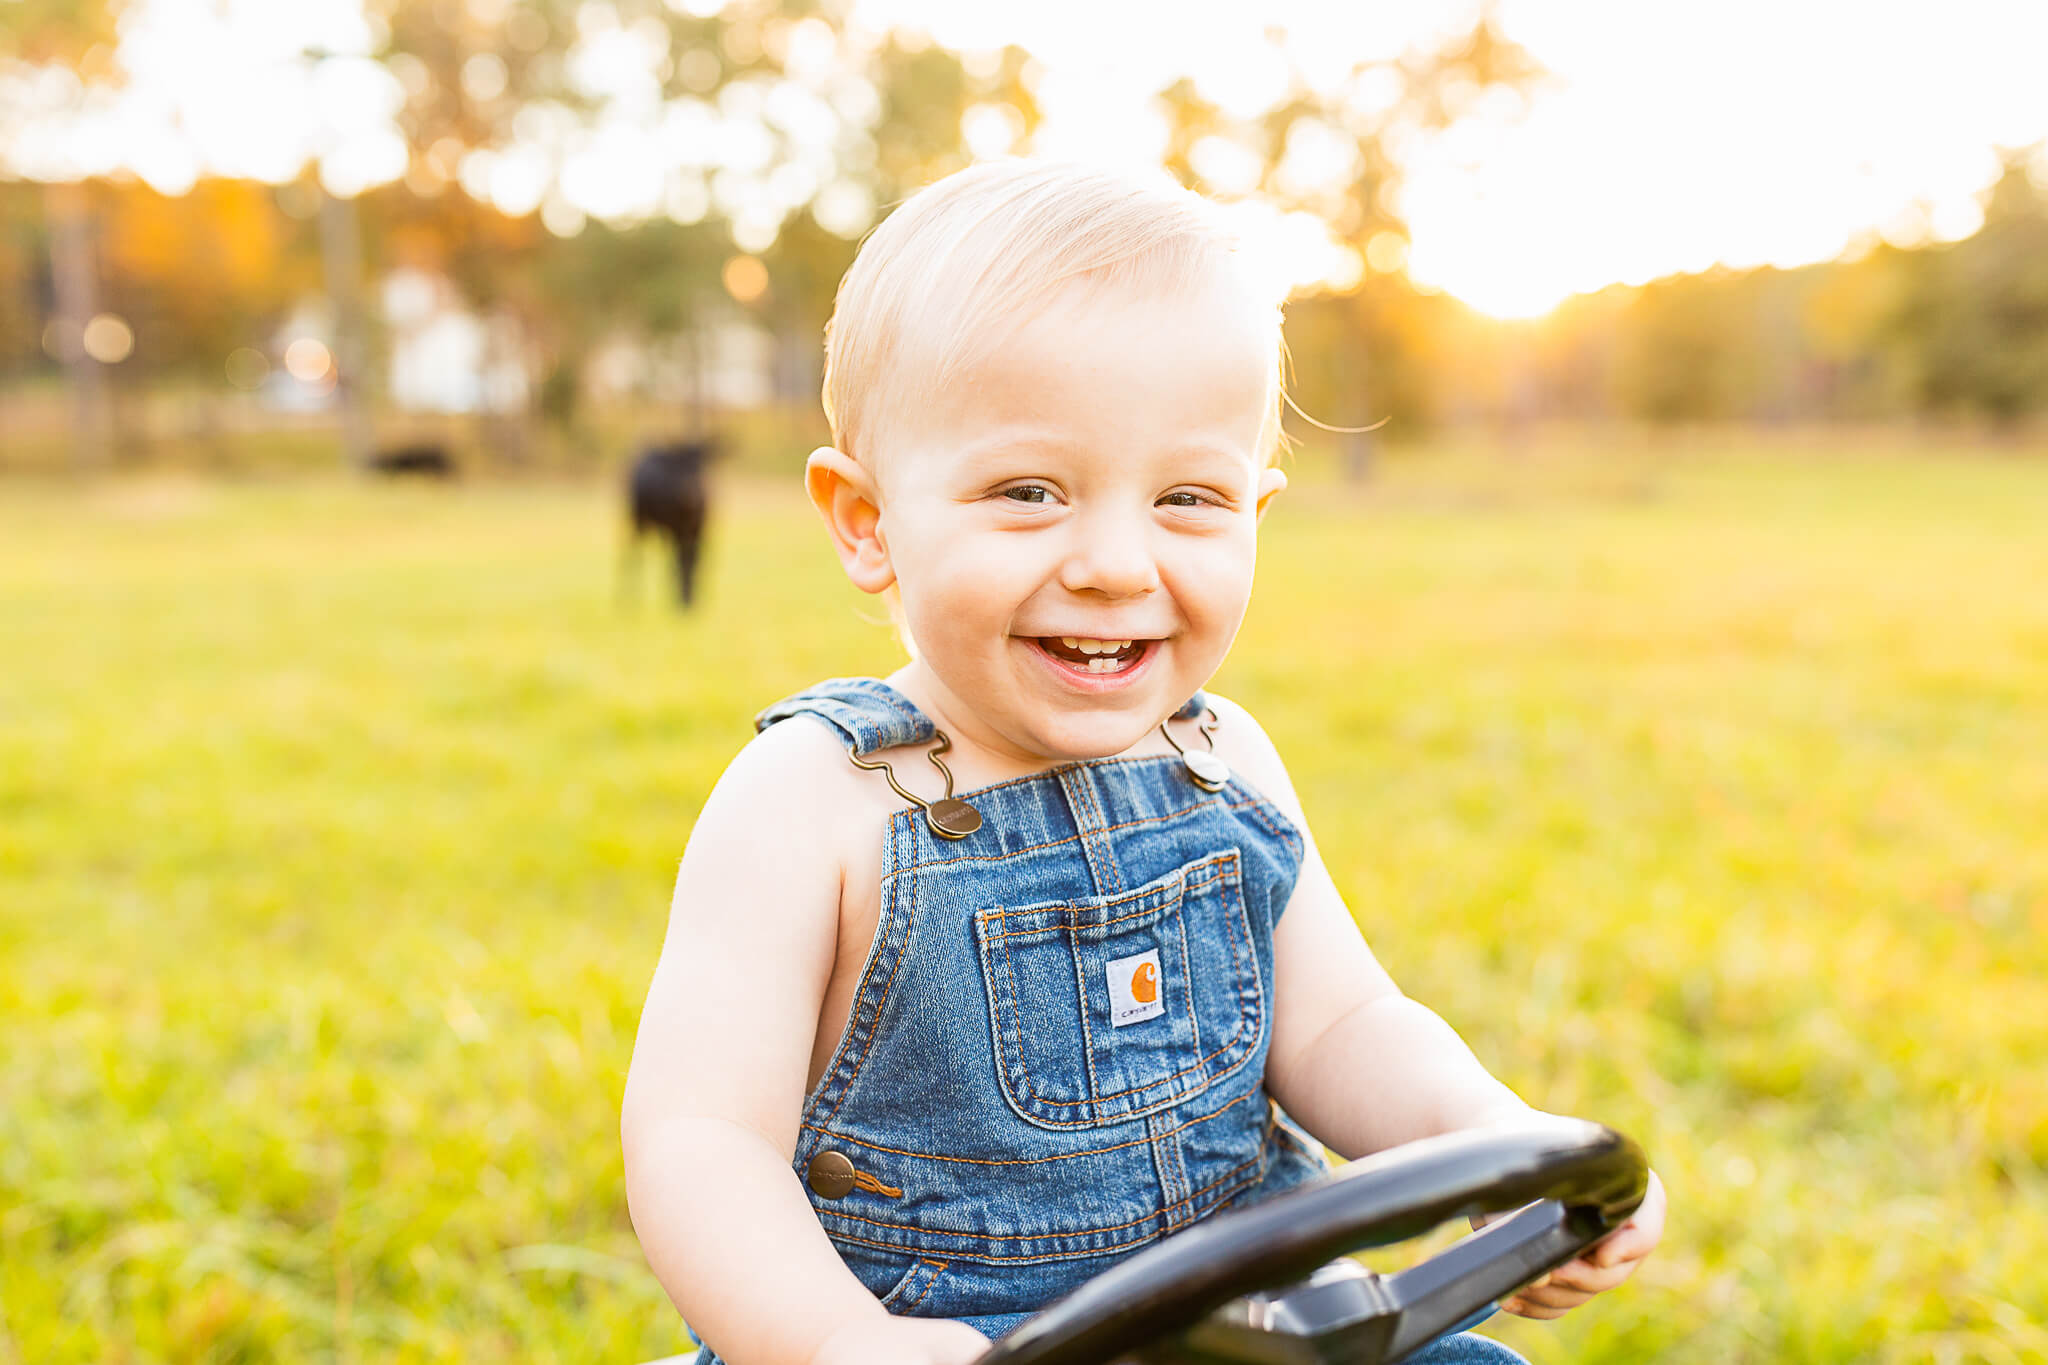 little boy in blue overalls laughing in a field